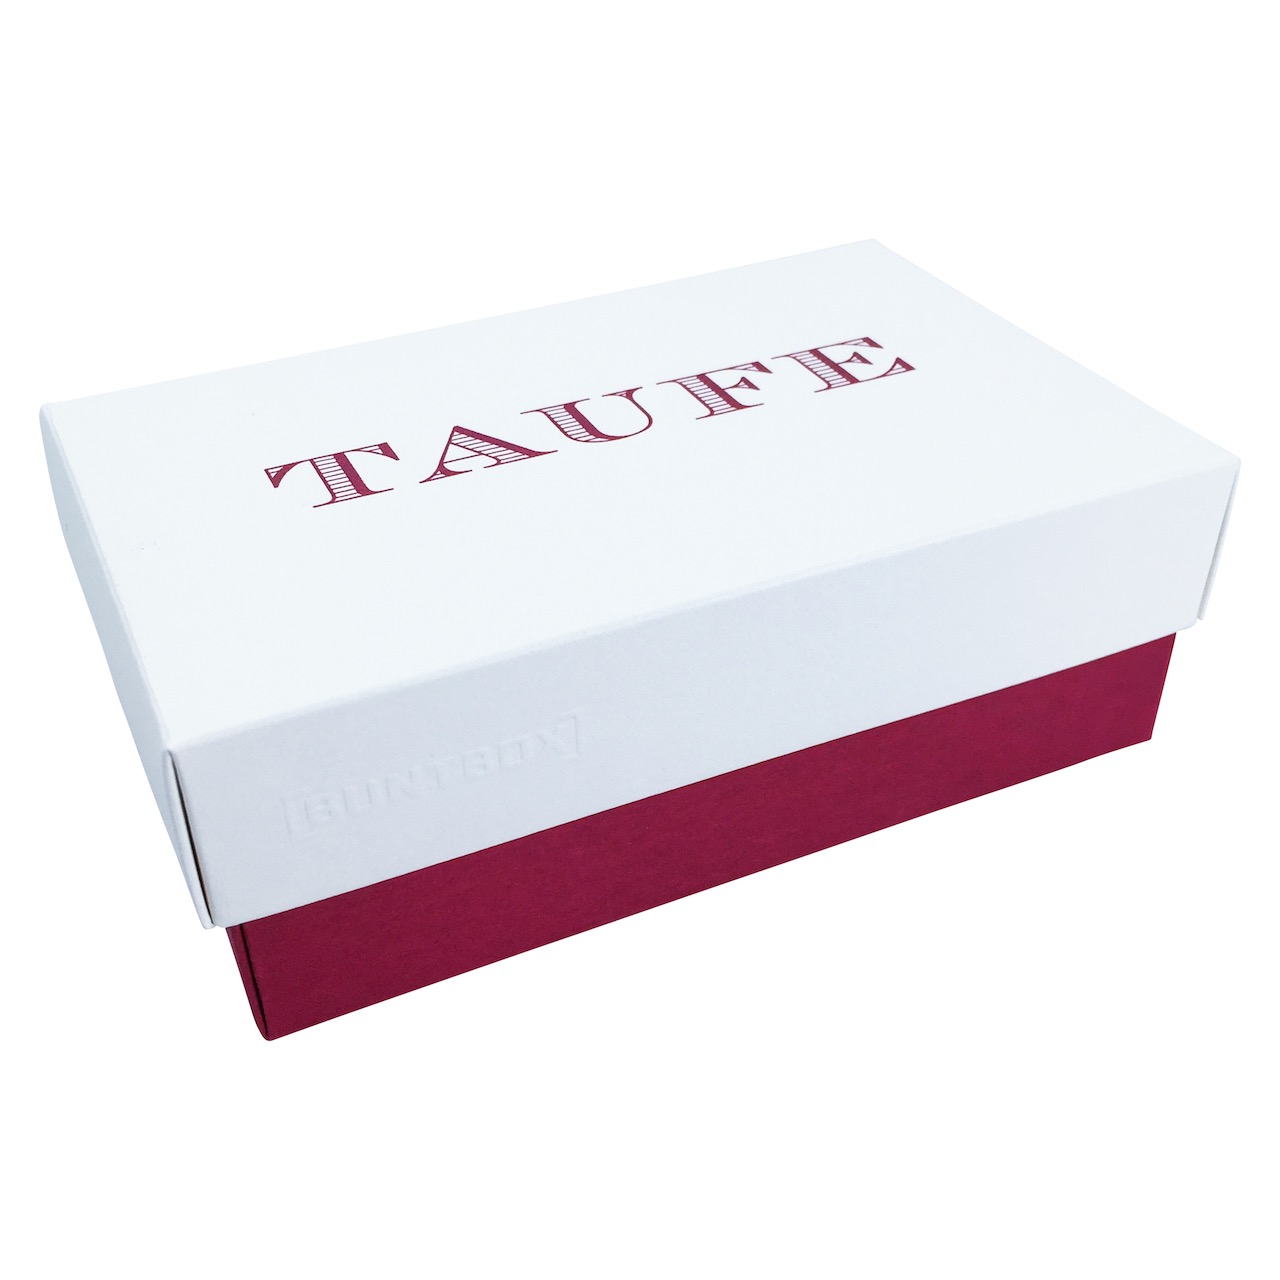 Buntbox XL Fine Paper Taufe in Champagner-Bordeaux